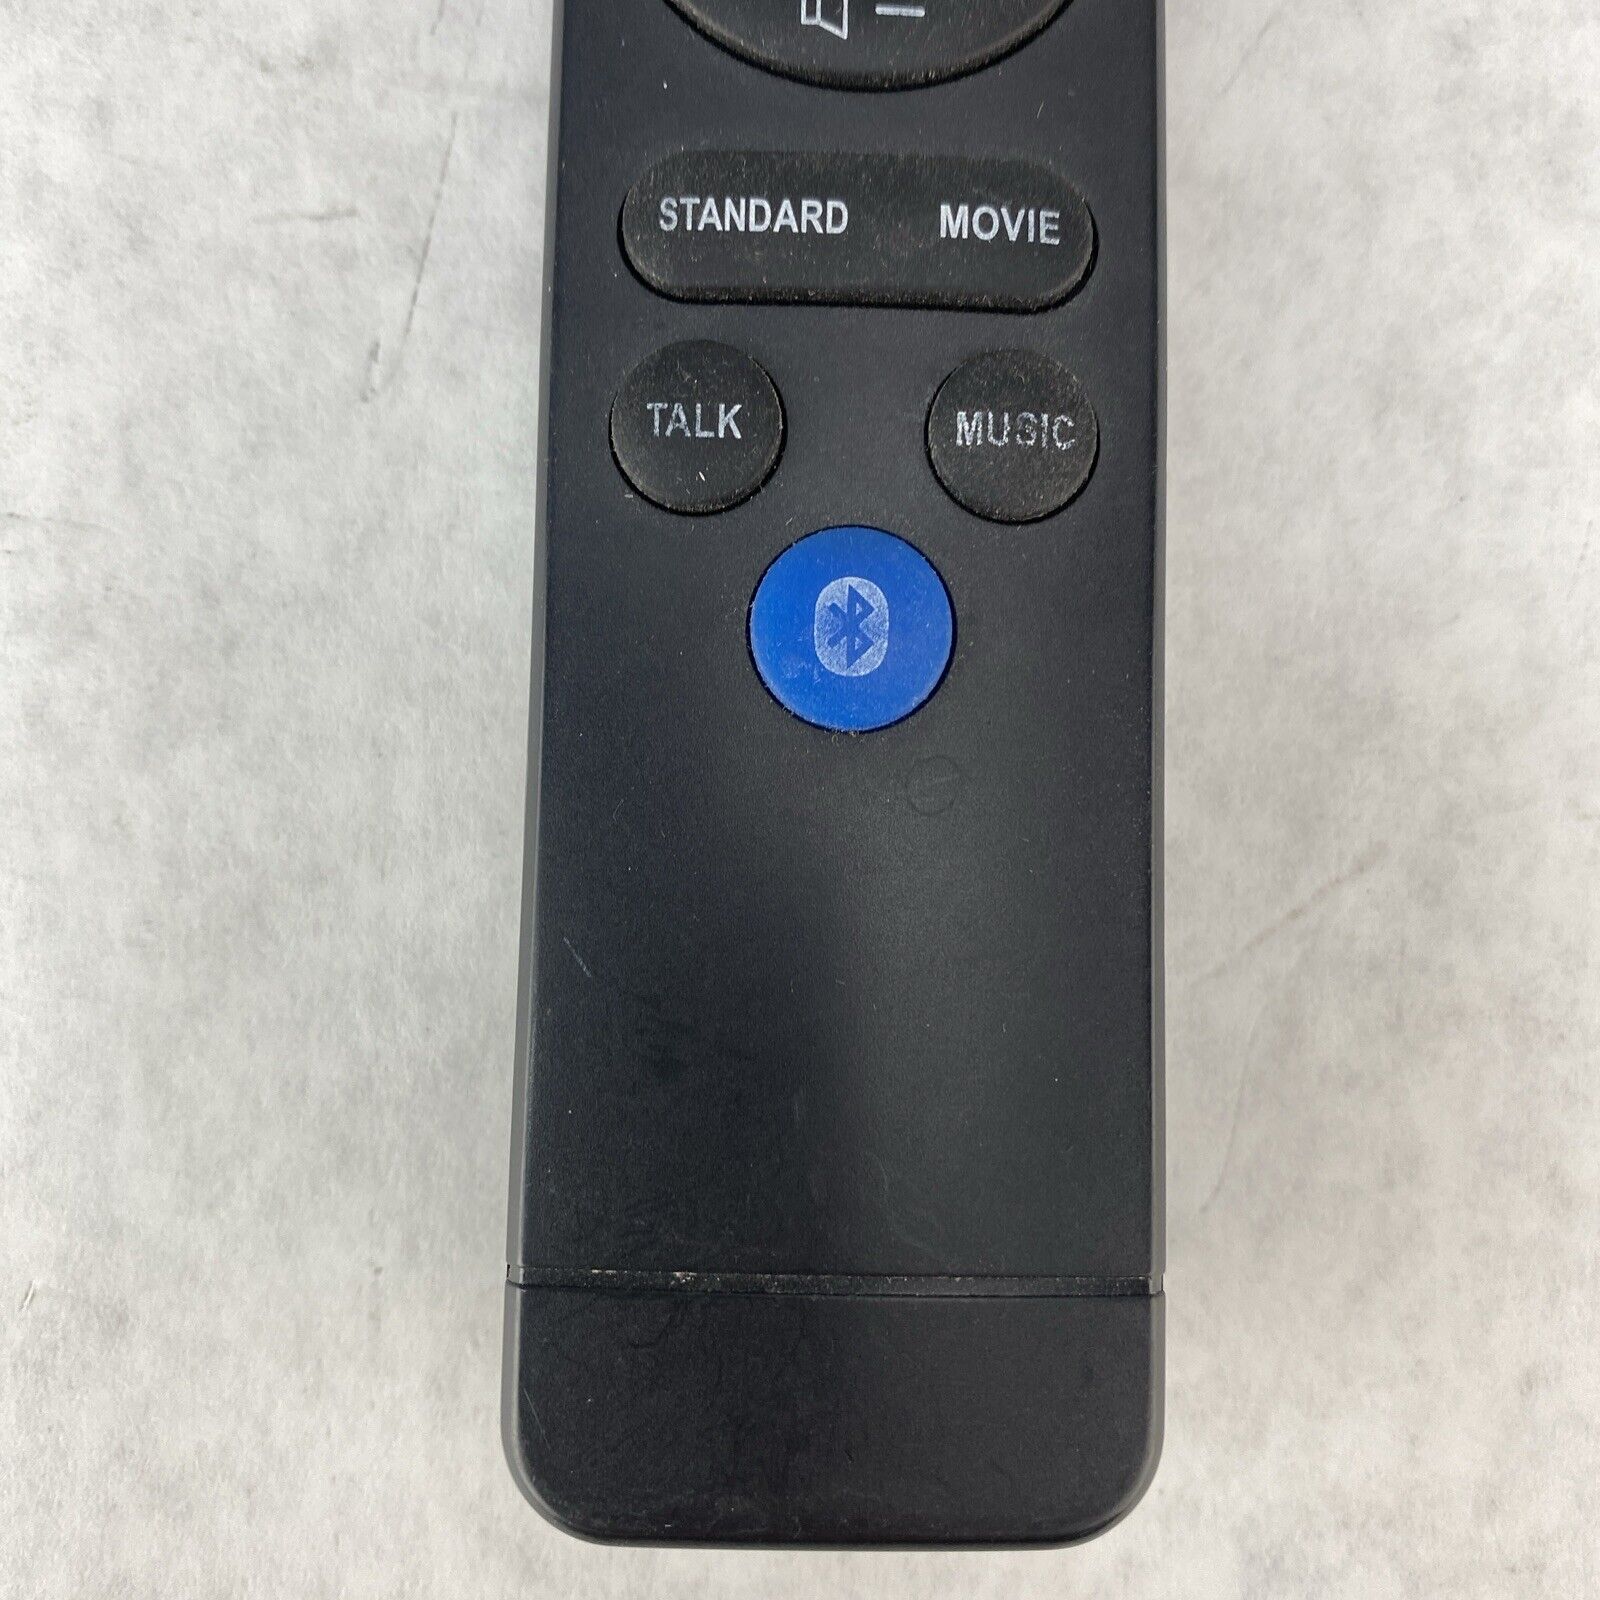 OEM Remote Control for Auking HDMI Projector Bluetooth Standard Movie Talk Music